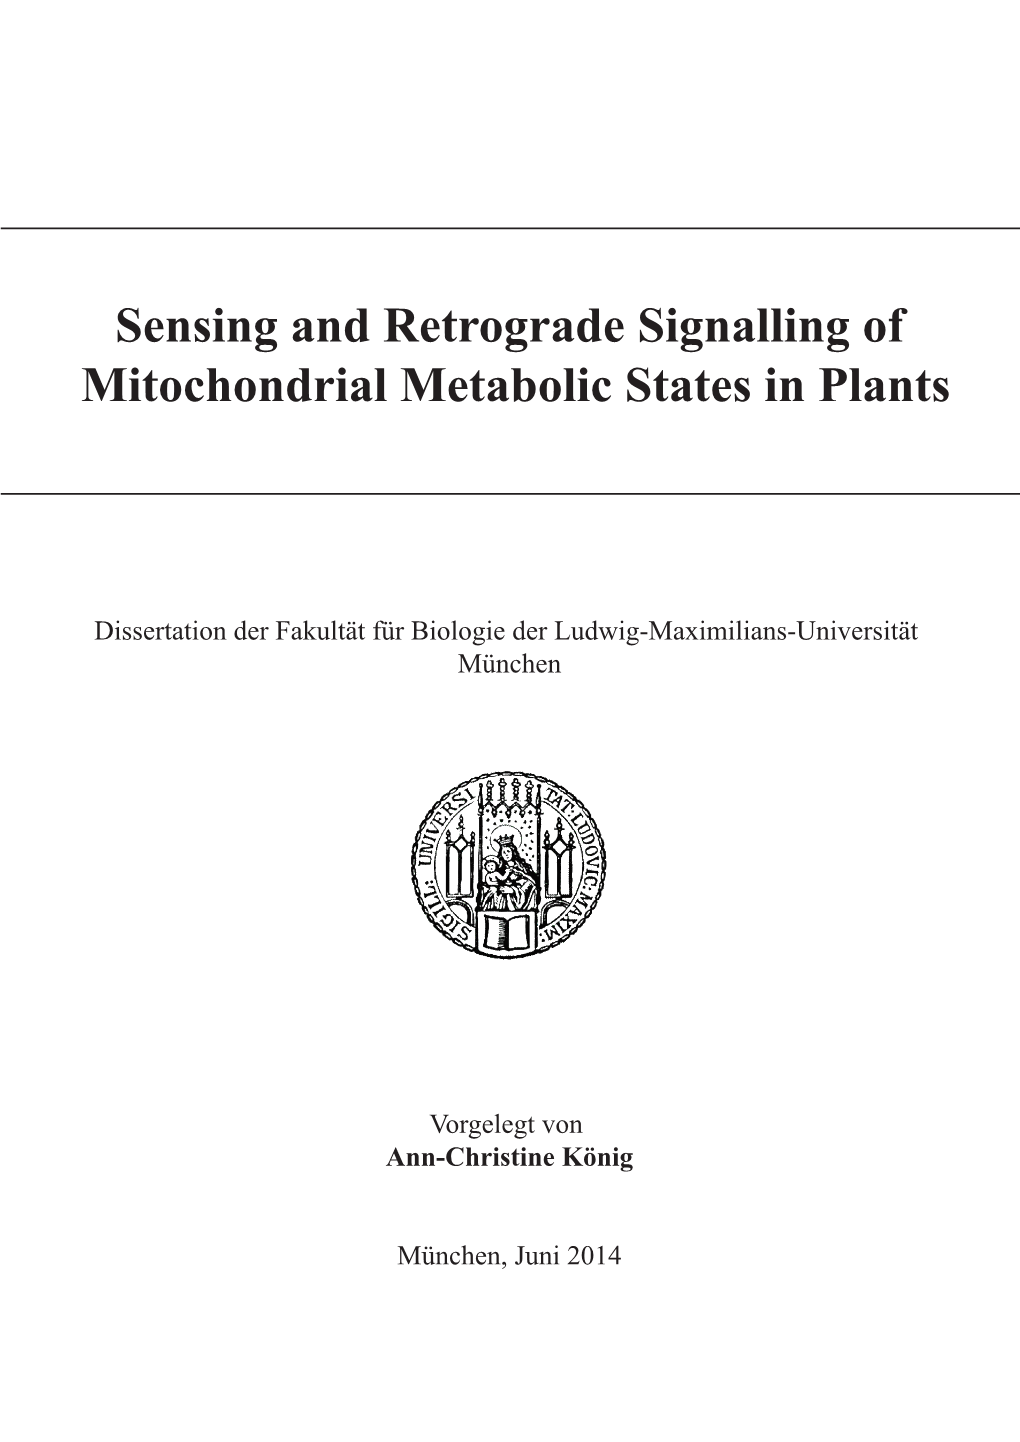 Sensing and Retrograde Signalling of Mitochondrial Metabolic States in Plants